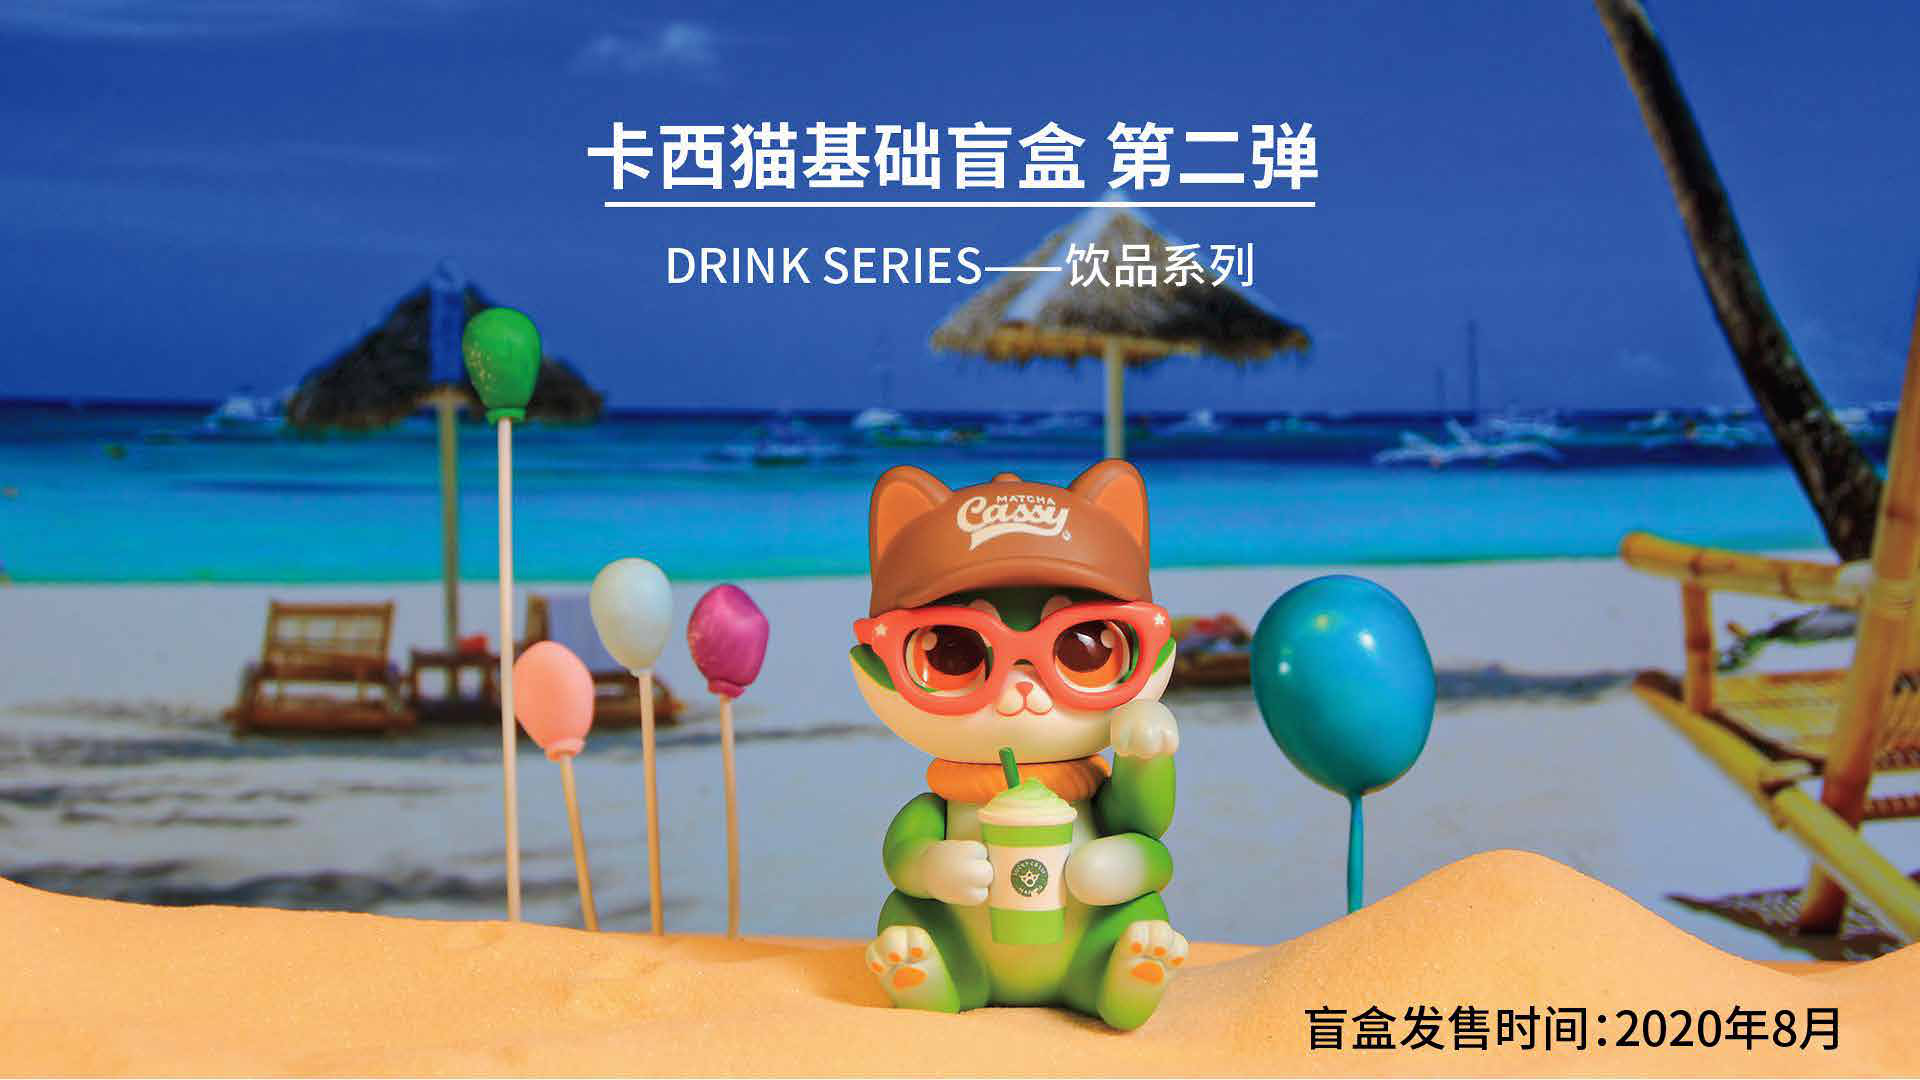 Cassy Drink Series by Cassy x Toy City